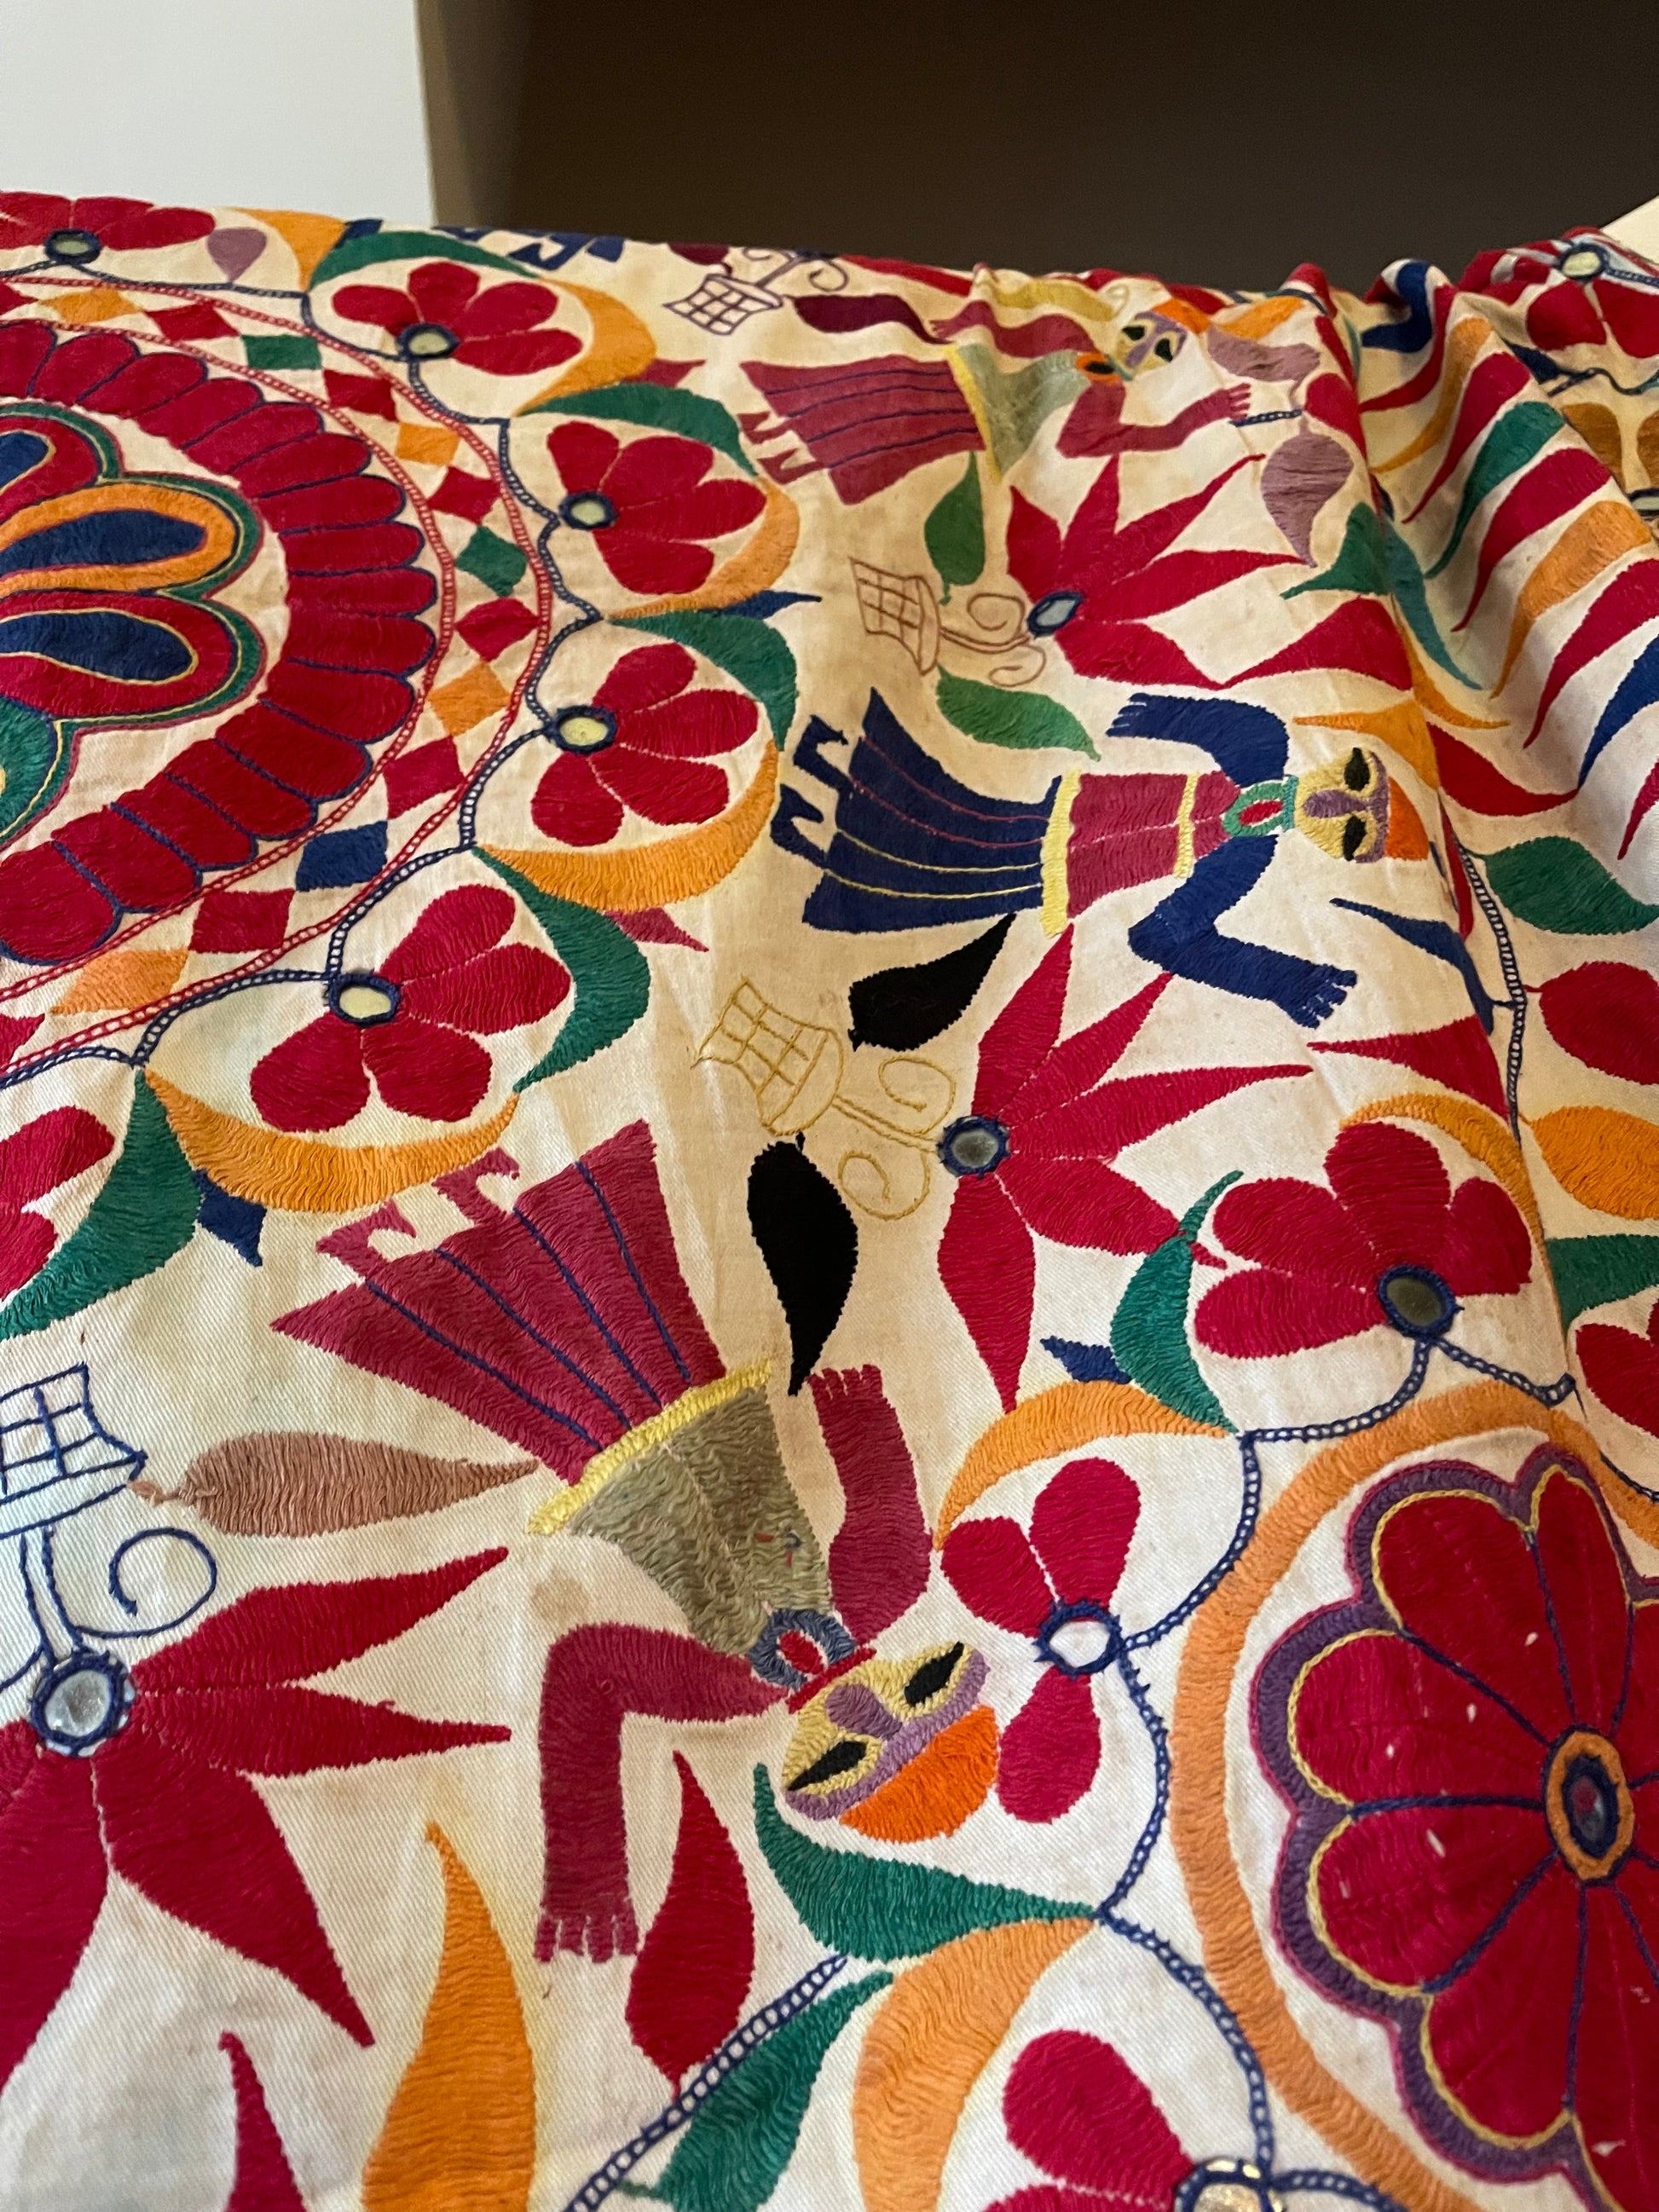 Very special Vintage Indian Embroidery | Huge | imagine it as a headboard! - The House Upstairs